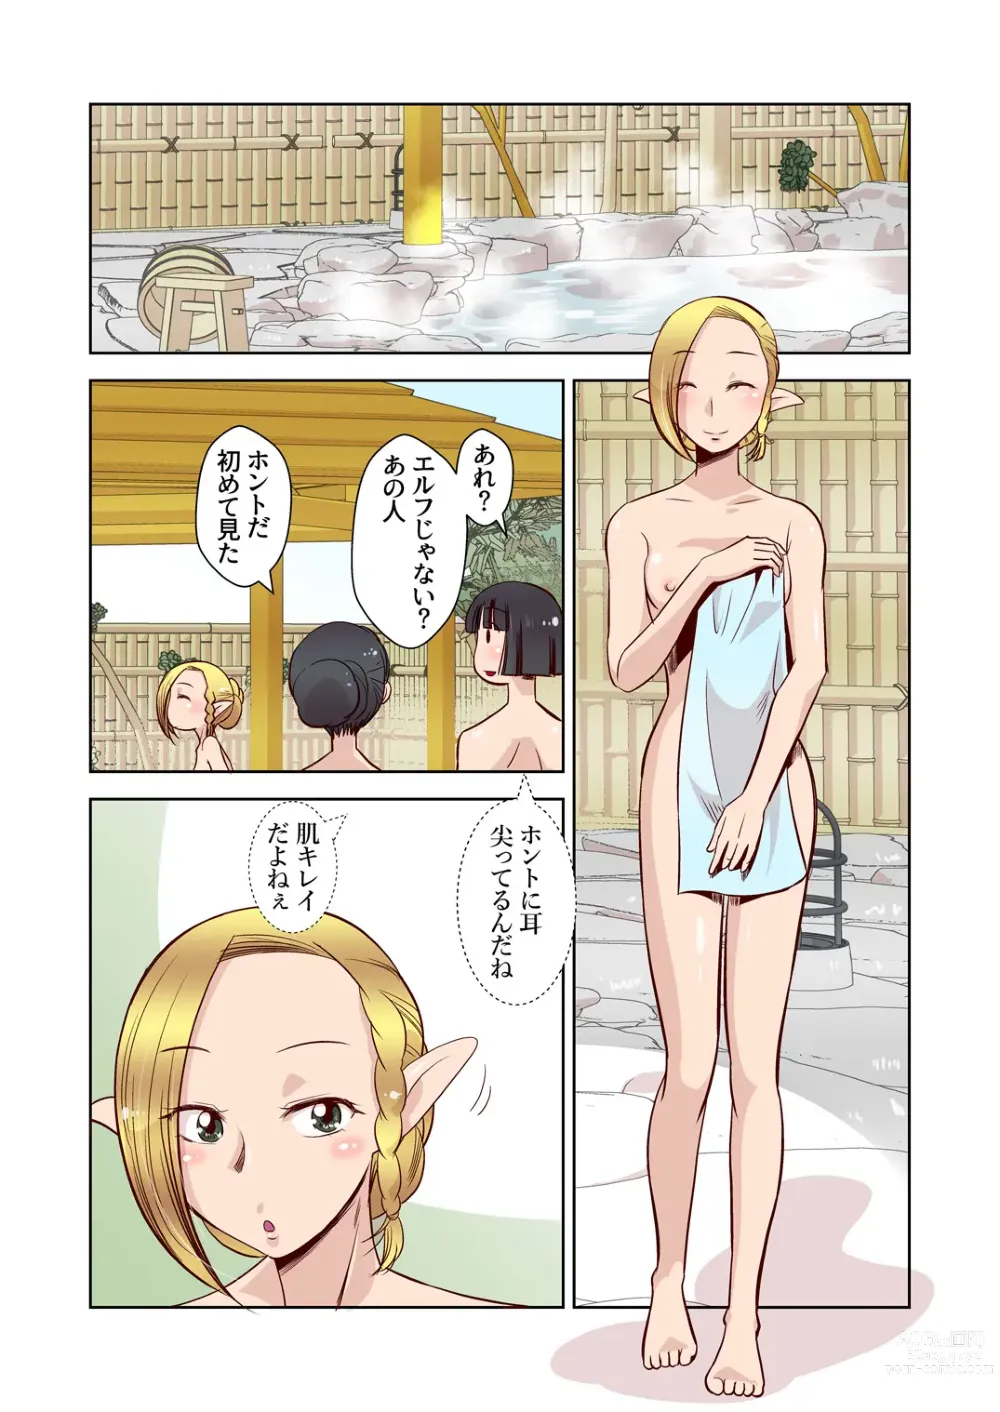 Page 5 of doujinshi My wife is elf 1